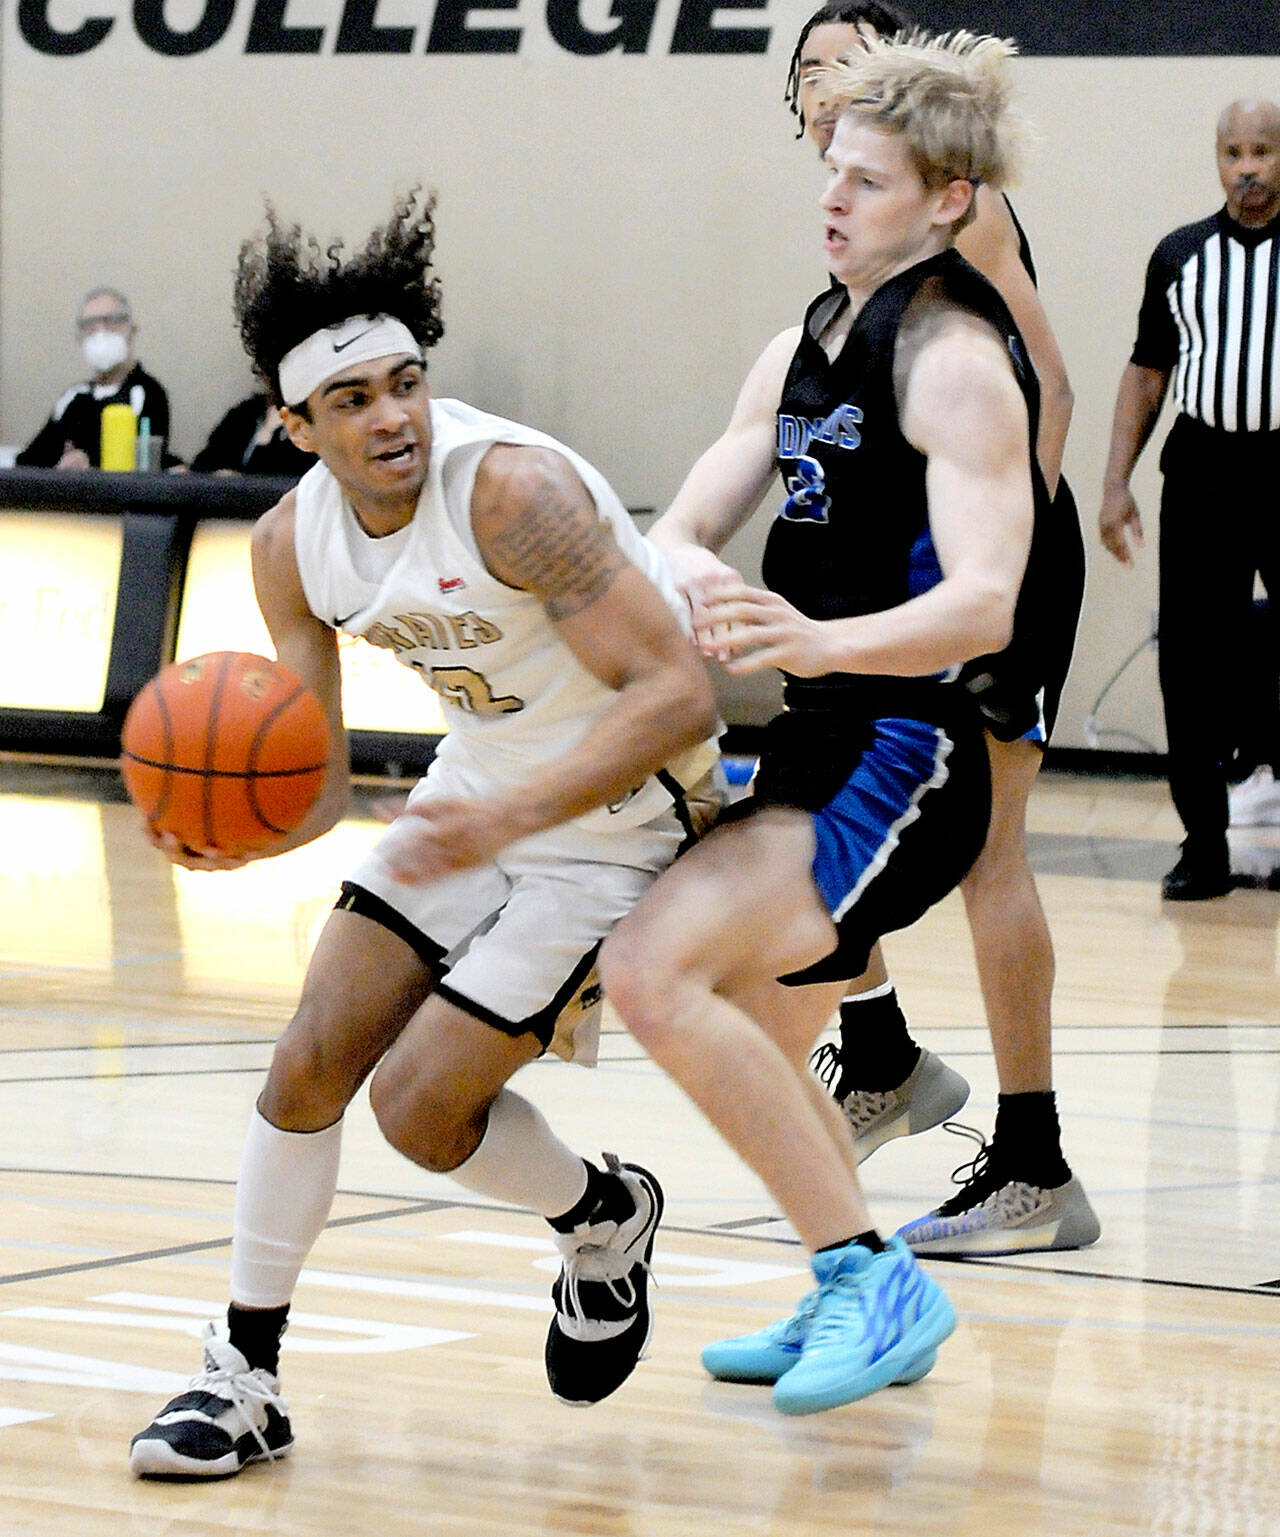 Peninsula’s Roosevelt Williams Jr., left, pushes to the lane around Edmonds’ Hans Stone during Saturday’s NWAC Central game in Port Angeles. (Keith Thorpe/Peninsula Daily News)